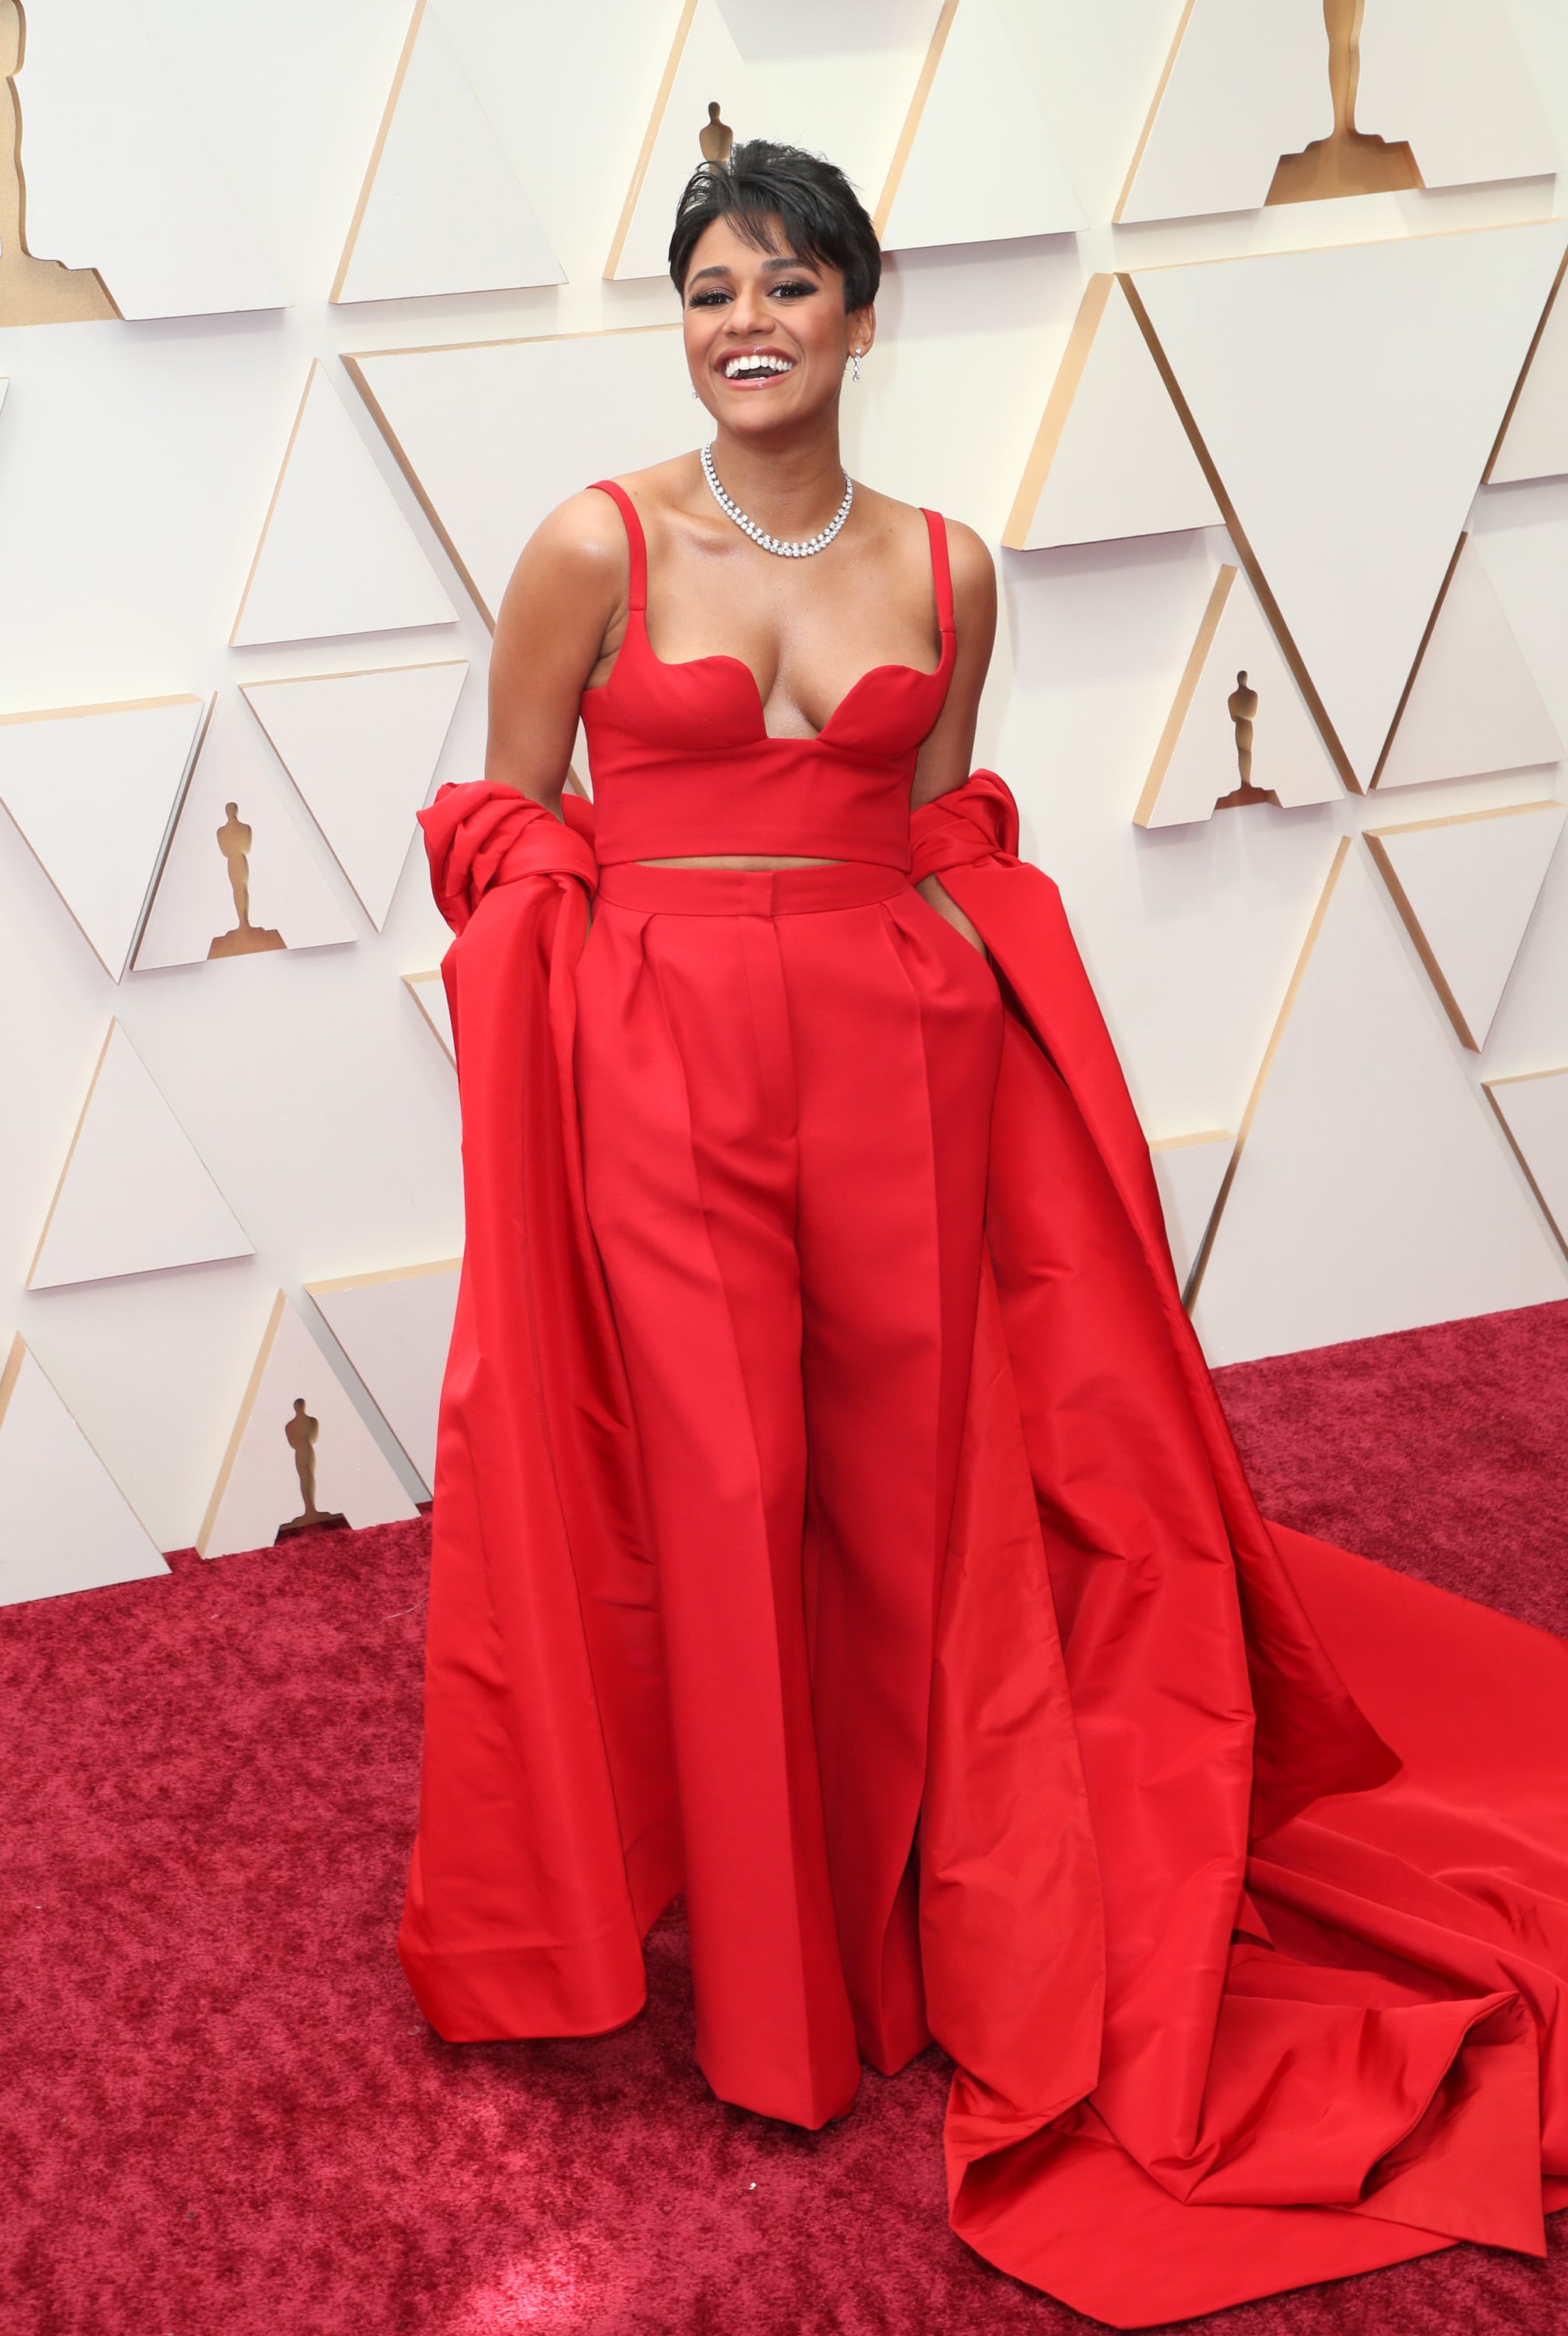 Oscars 2022: All the red carpet looks from suits to plunging necklines